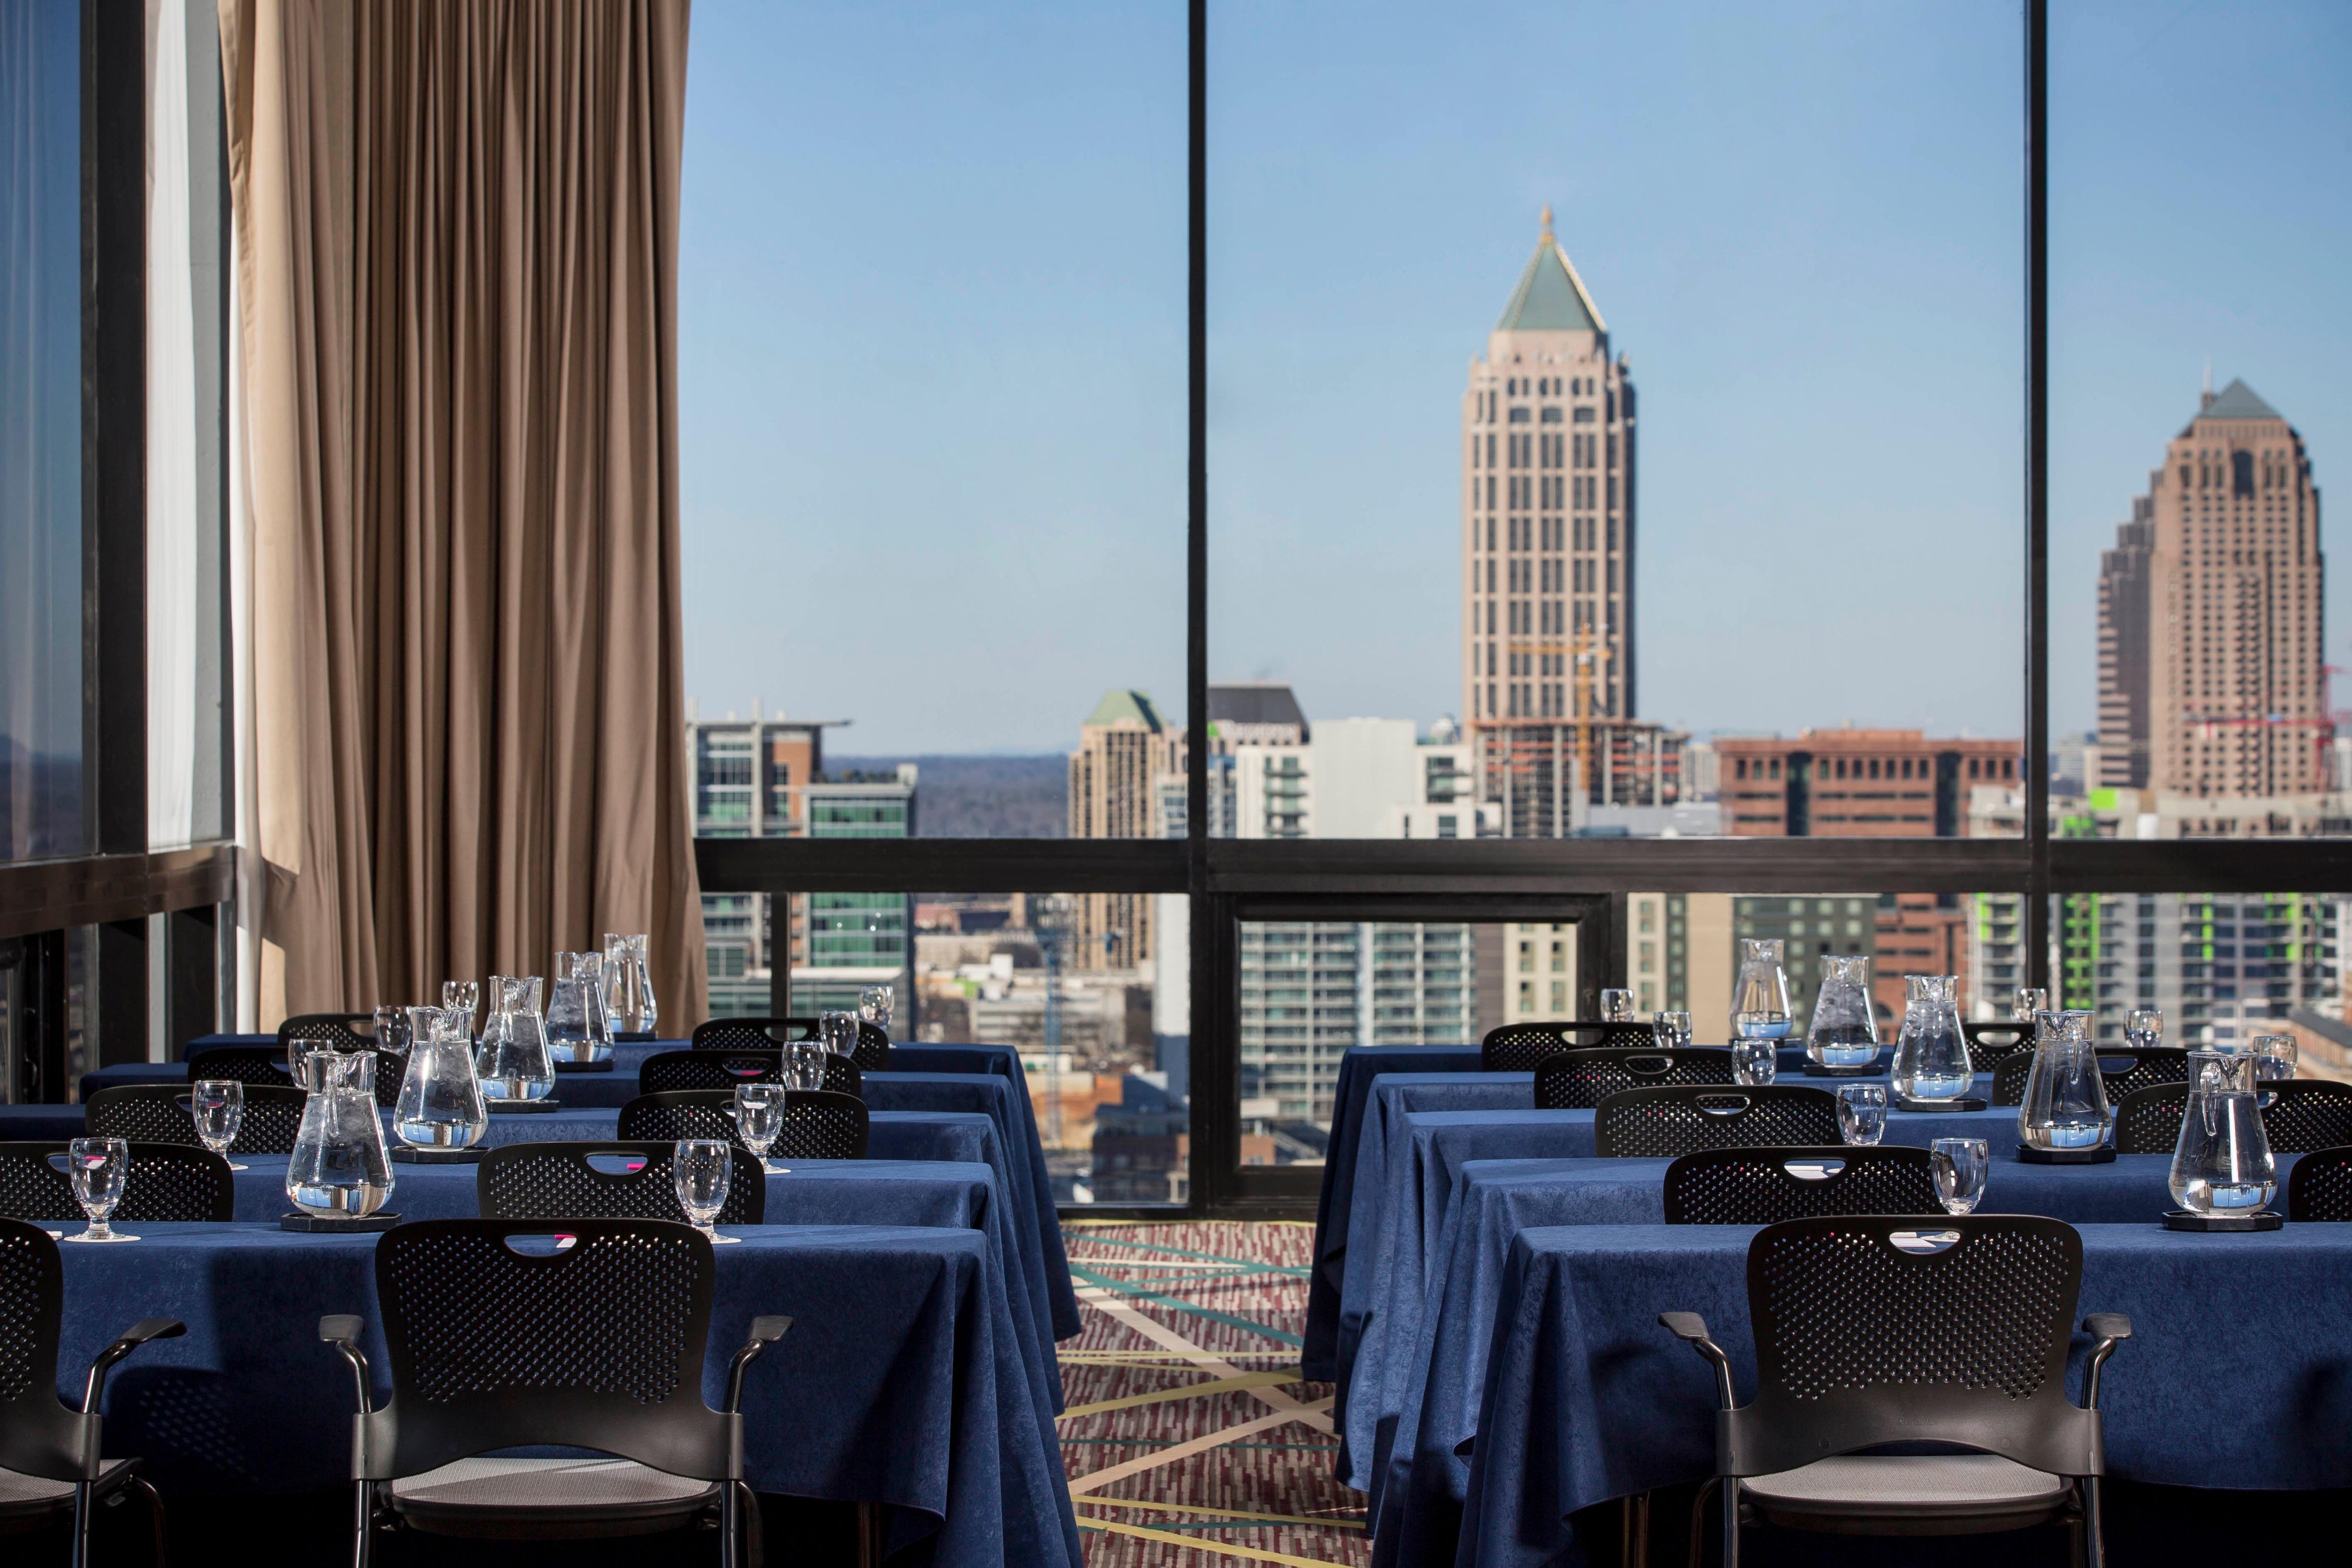 Unparalleled views when you have a meeting in the SKY Room.